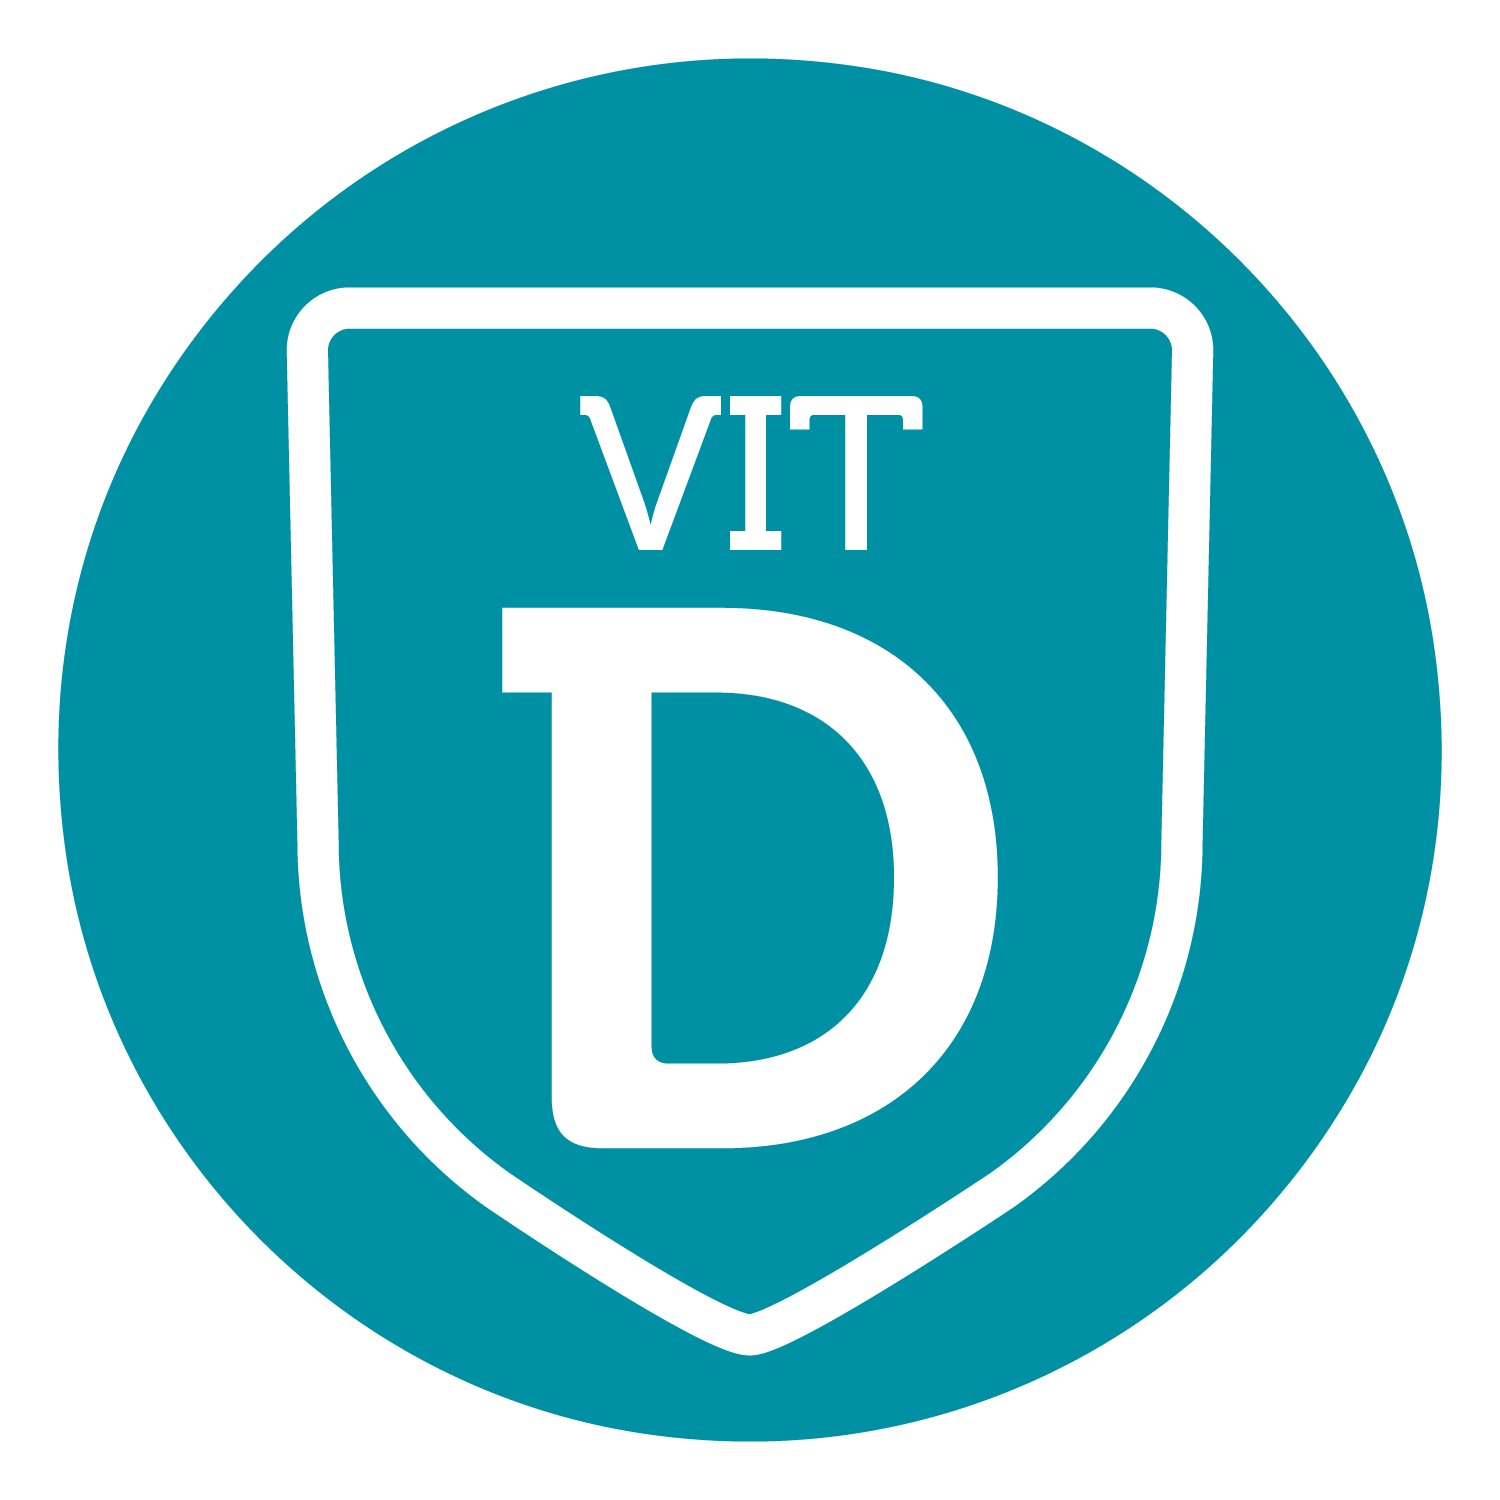 A circular, blue and white icon with Vit D written in the centre of a white shield